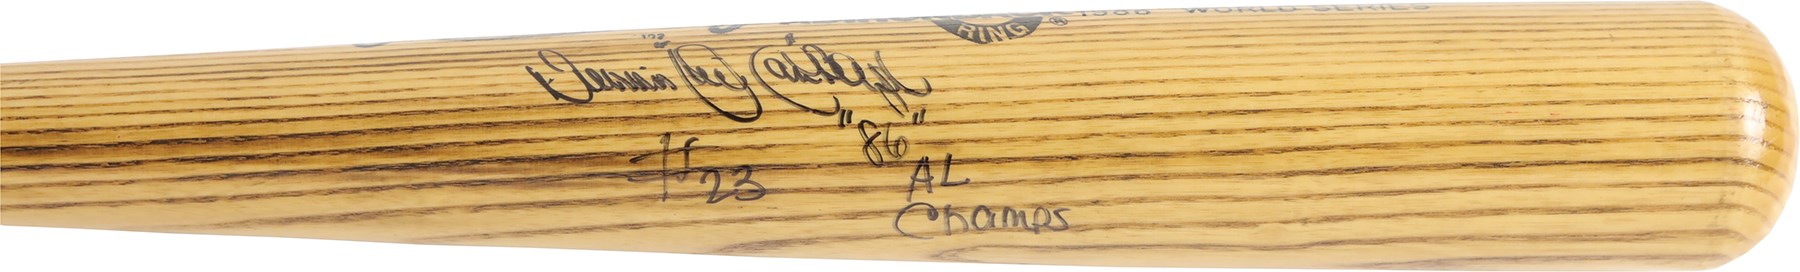 1986 "Oil Can" Boyd Autographed Game Issued World Series Bat